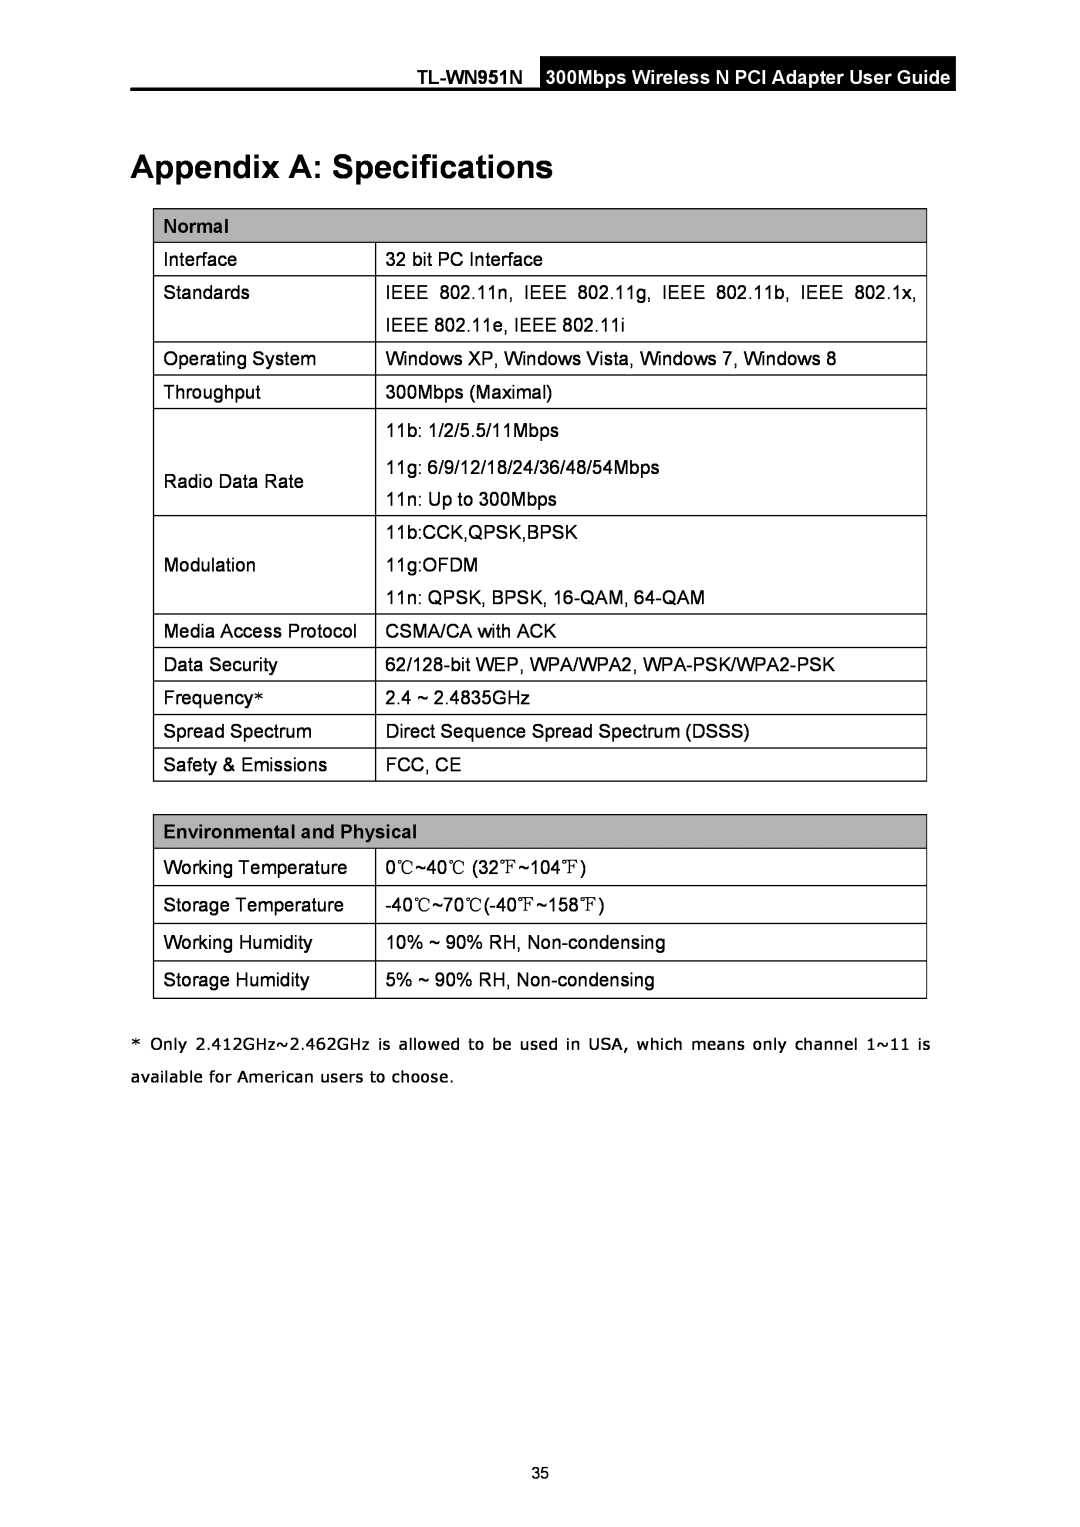 TP-Link TL-WN951N manual Appendix A Specifications, Normal, Environmental and Physical 